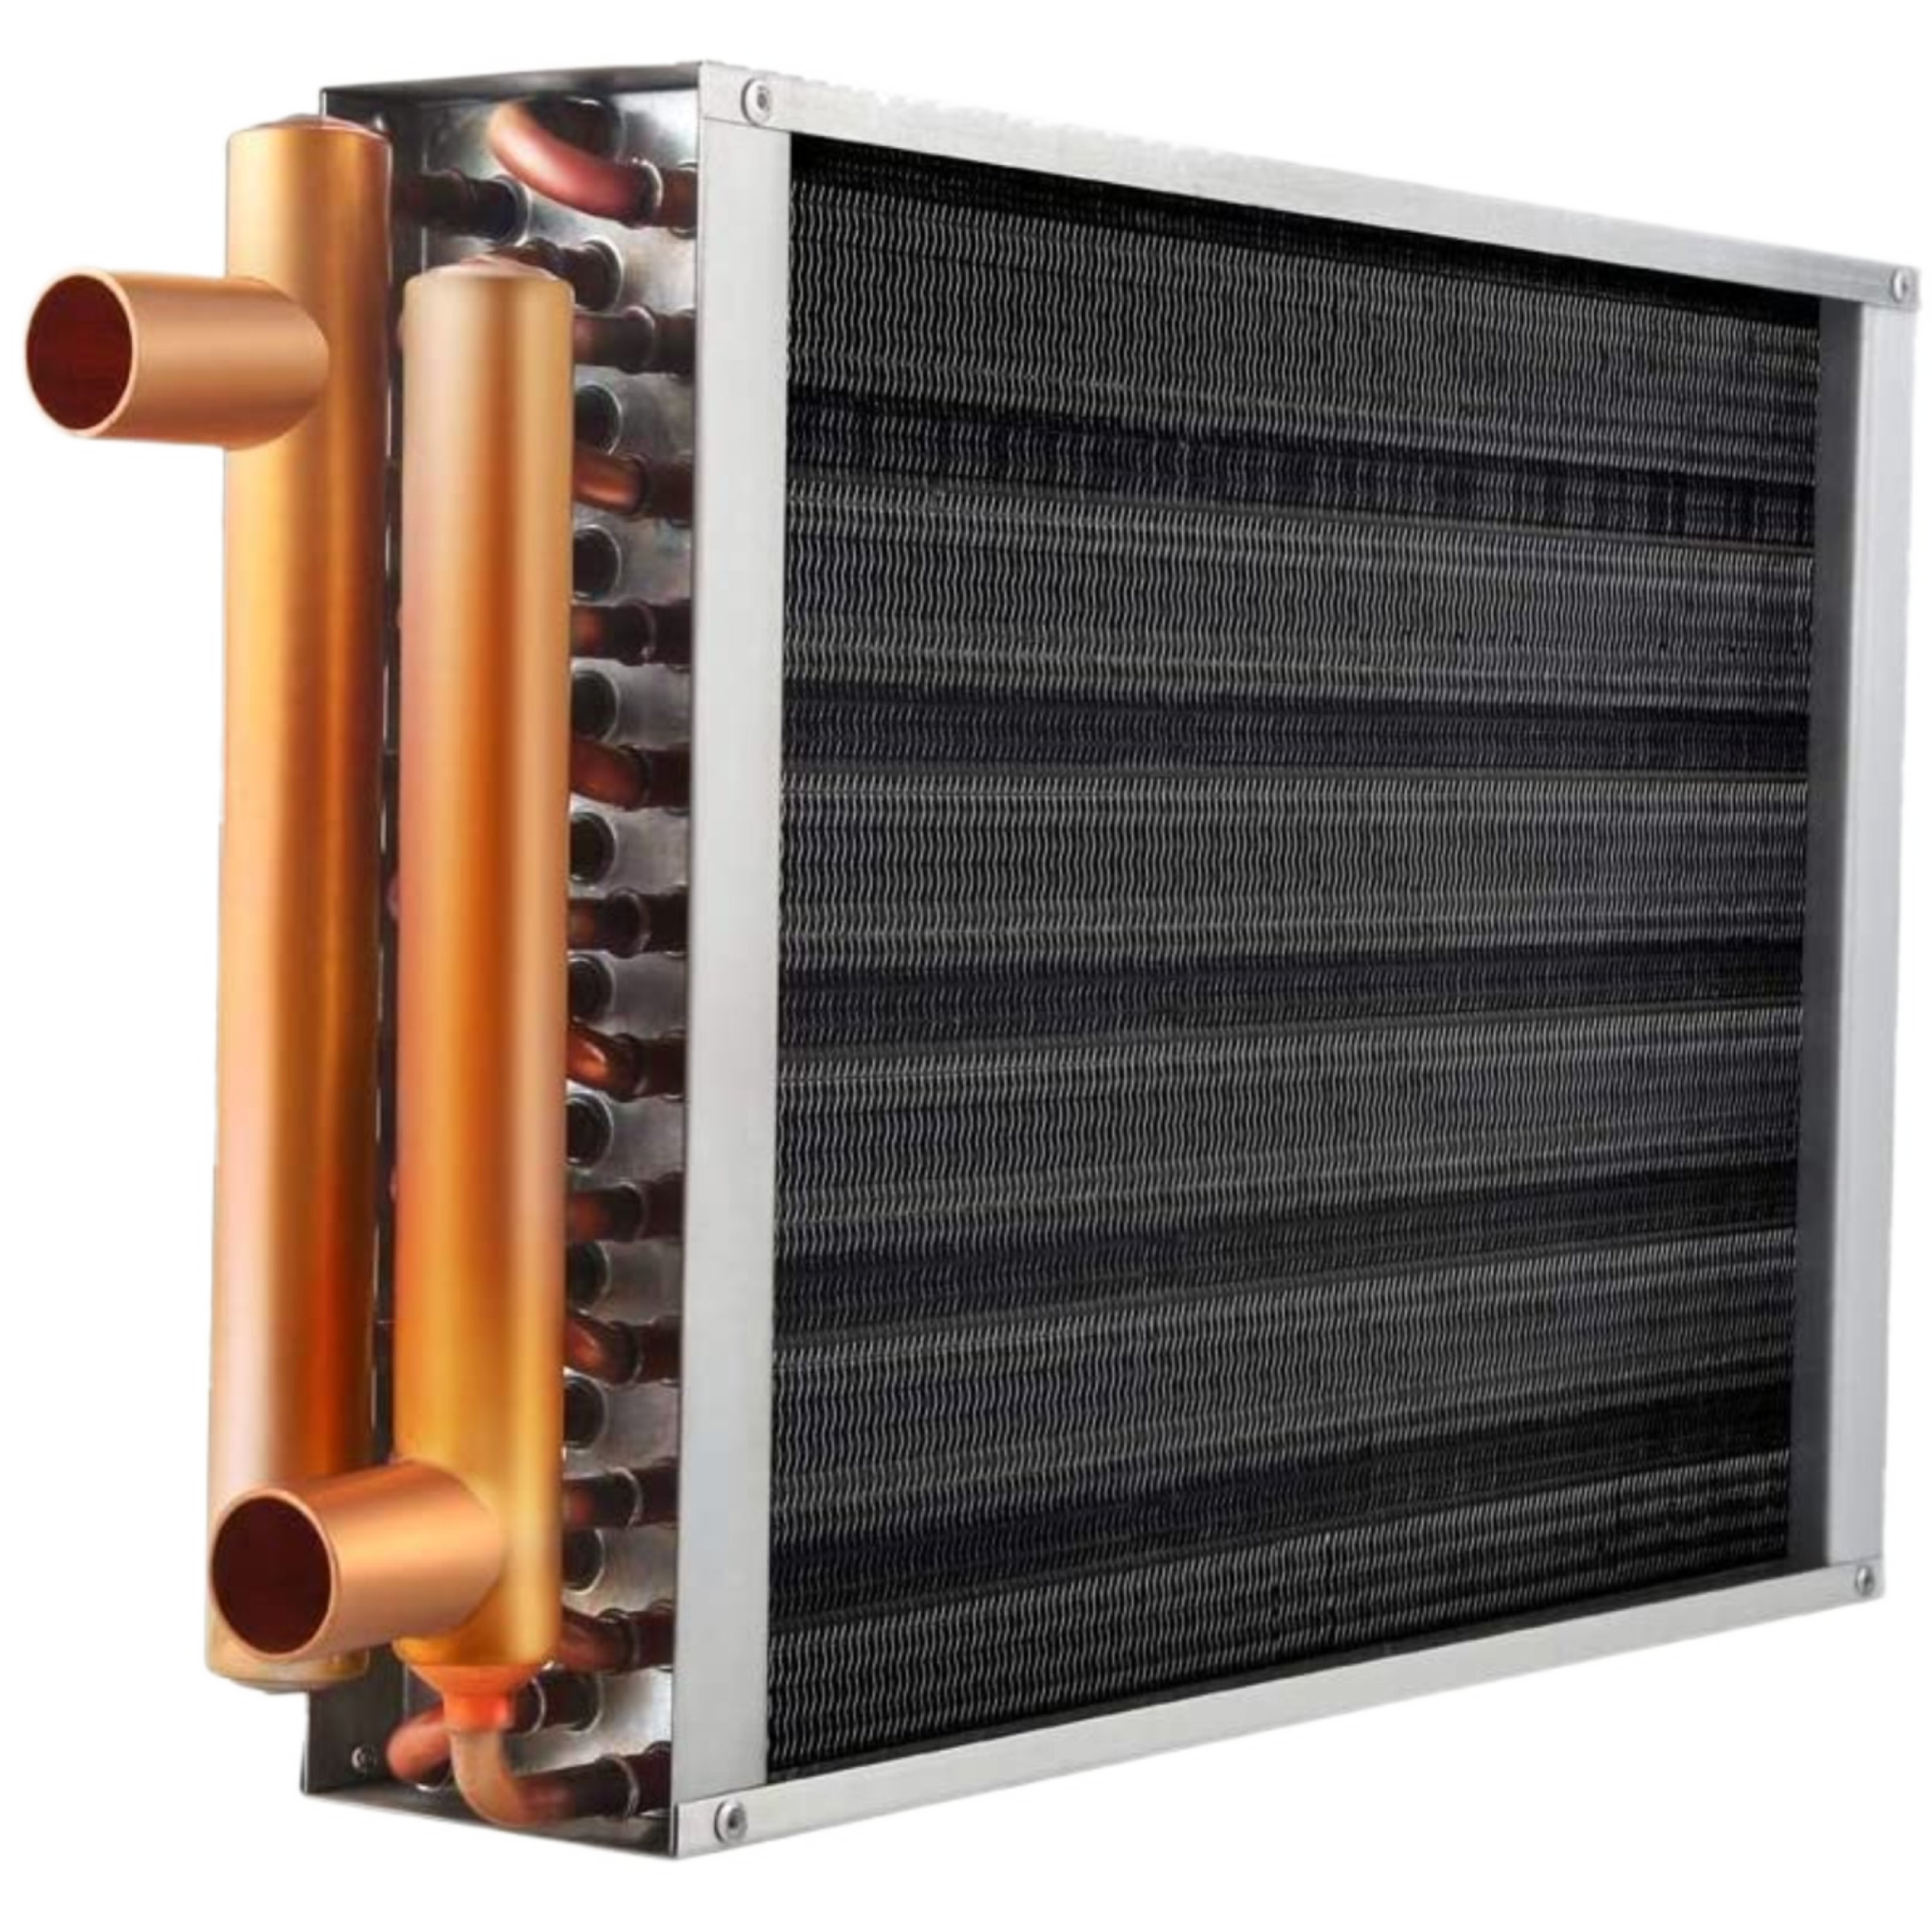 HTL 12 X12 Hydronic Coil Air to Water Heat Exchanger 6GPM, PD 0.49 PSI, 43875 BTU/h to 60000 BTU/h